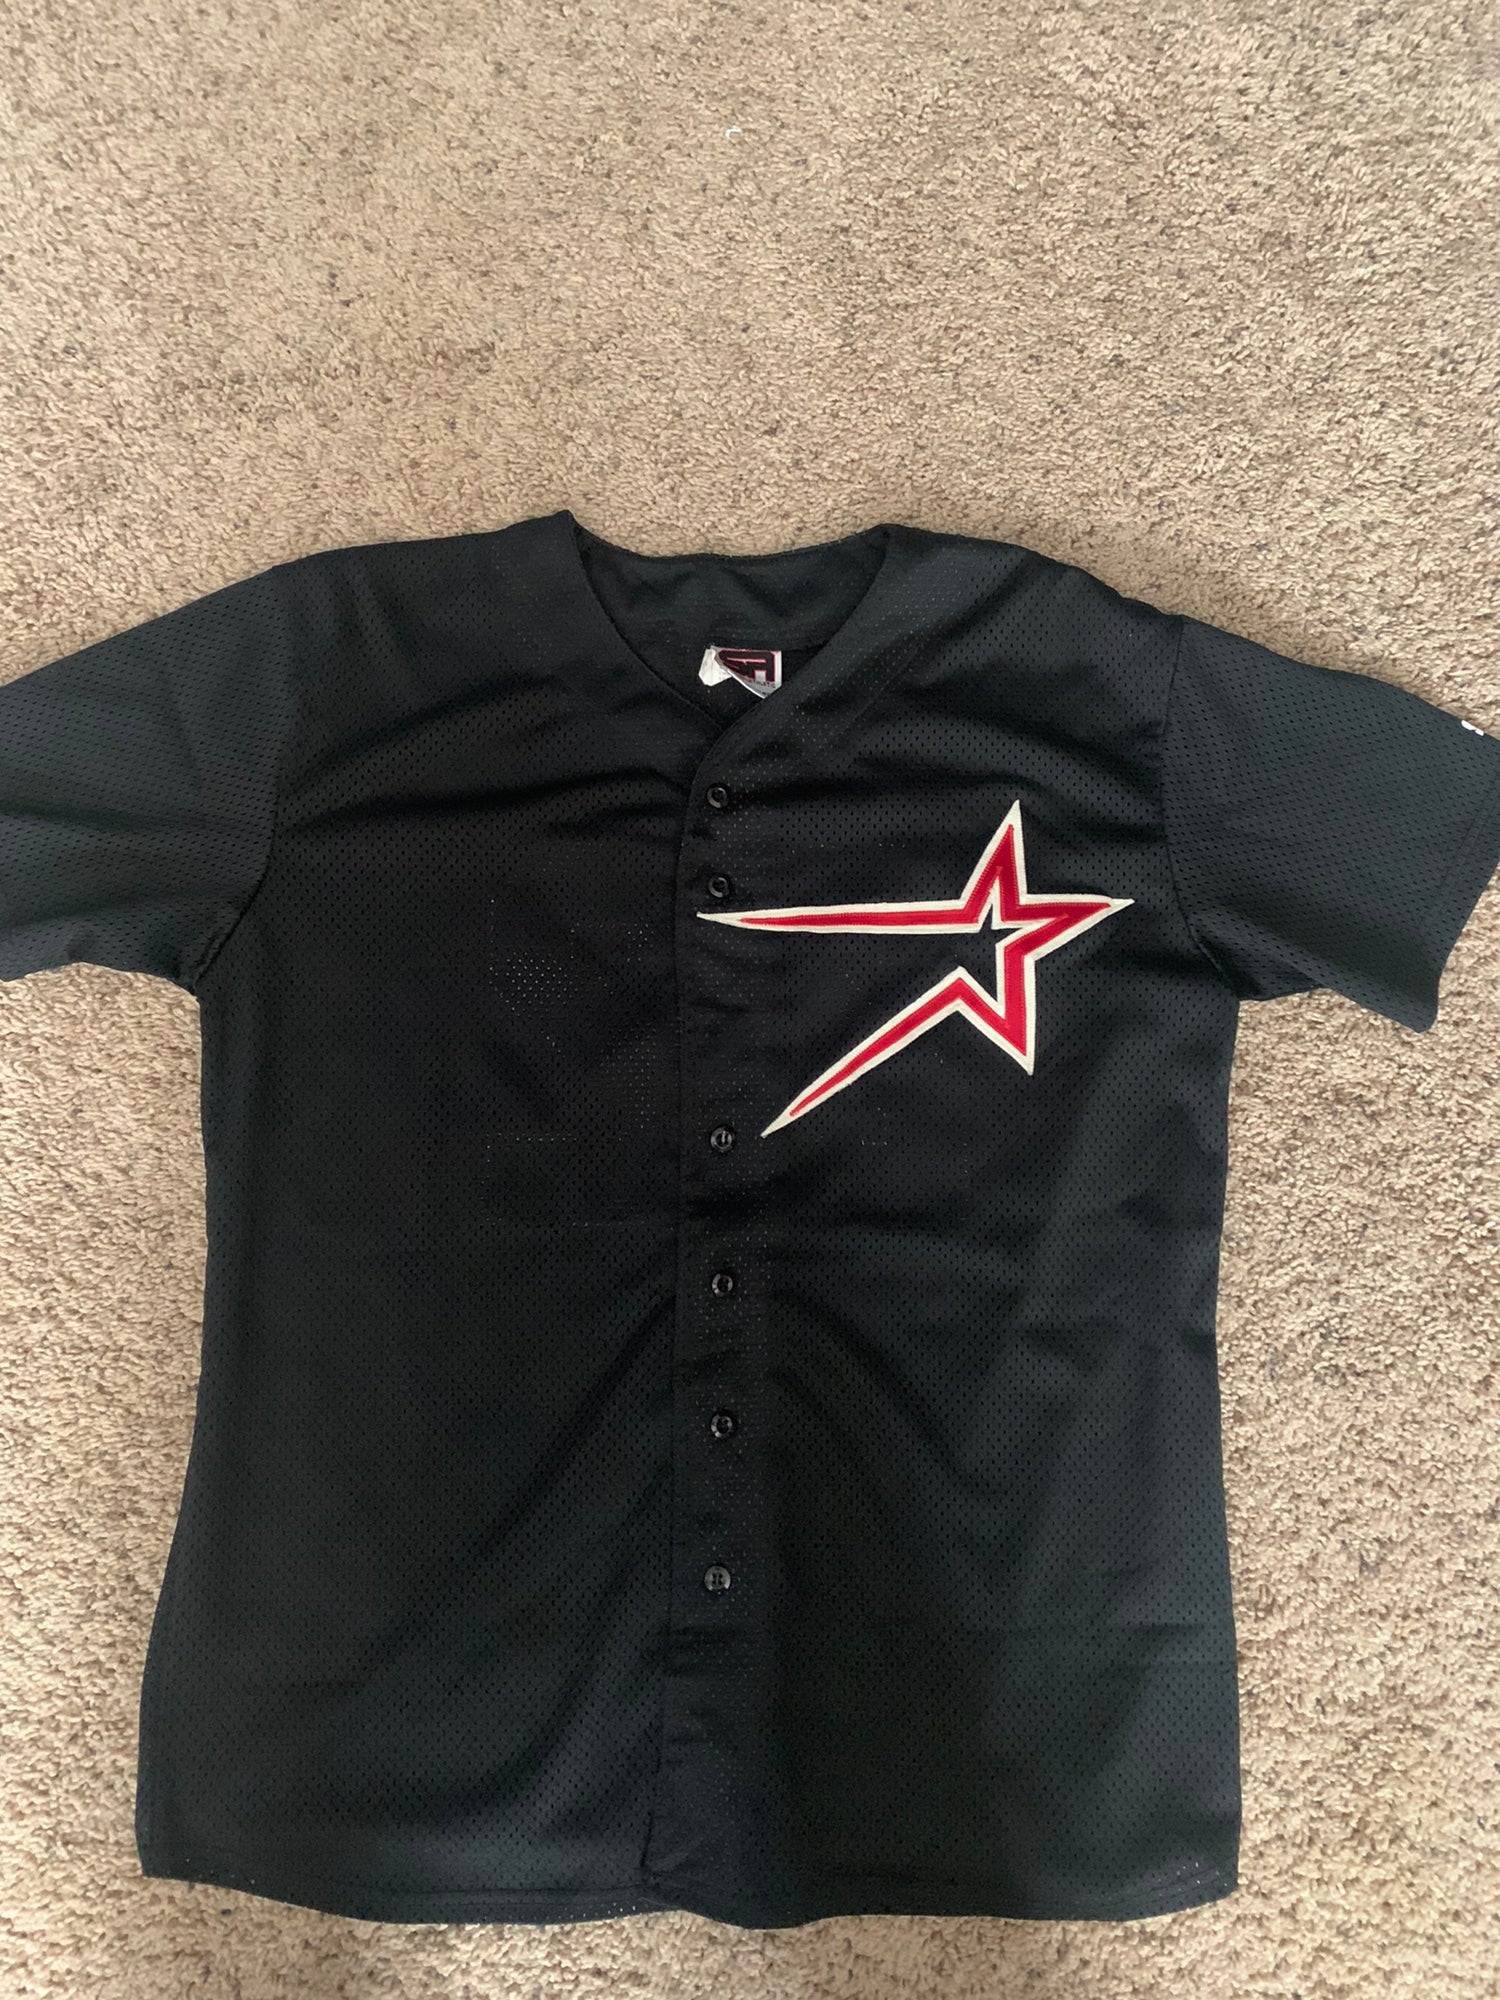 ROGER CLEMENS Houston Astros Majestic Cooperstown Throwback